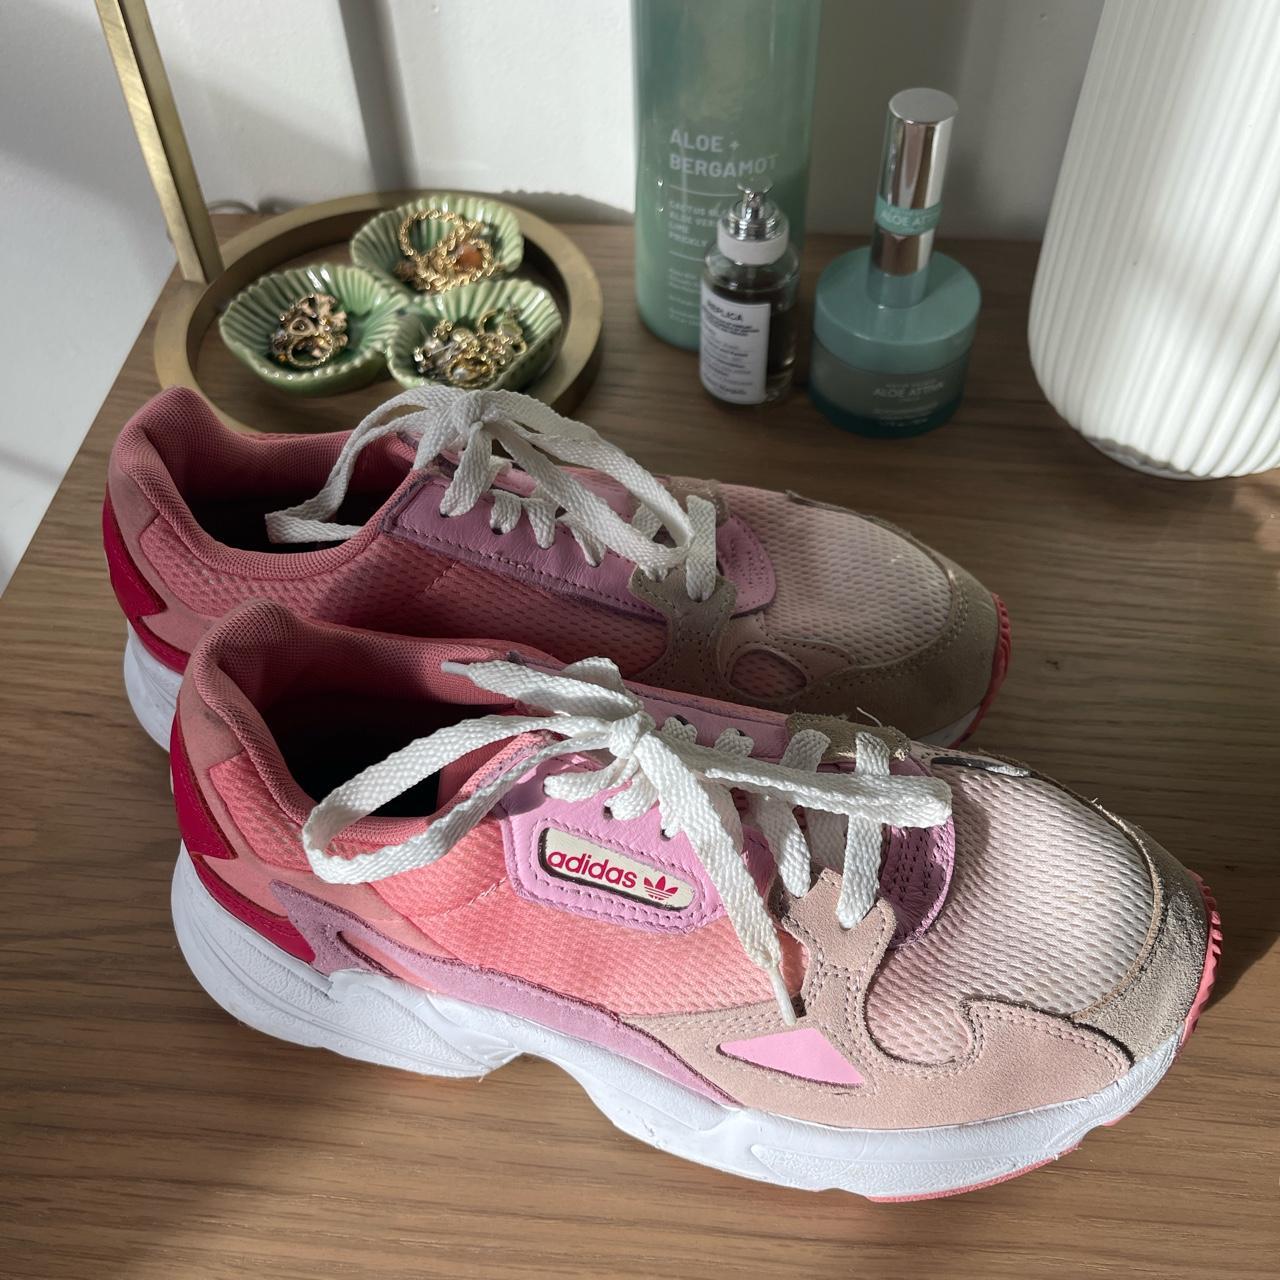 Adidas Women's Pink and Tan Trainers